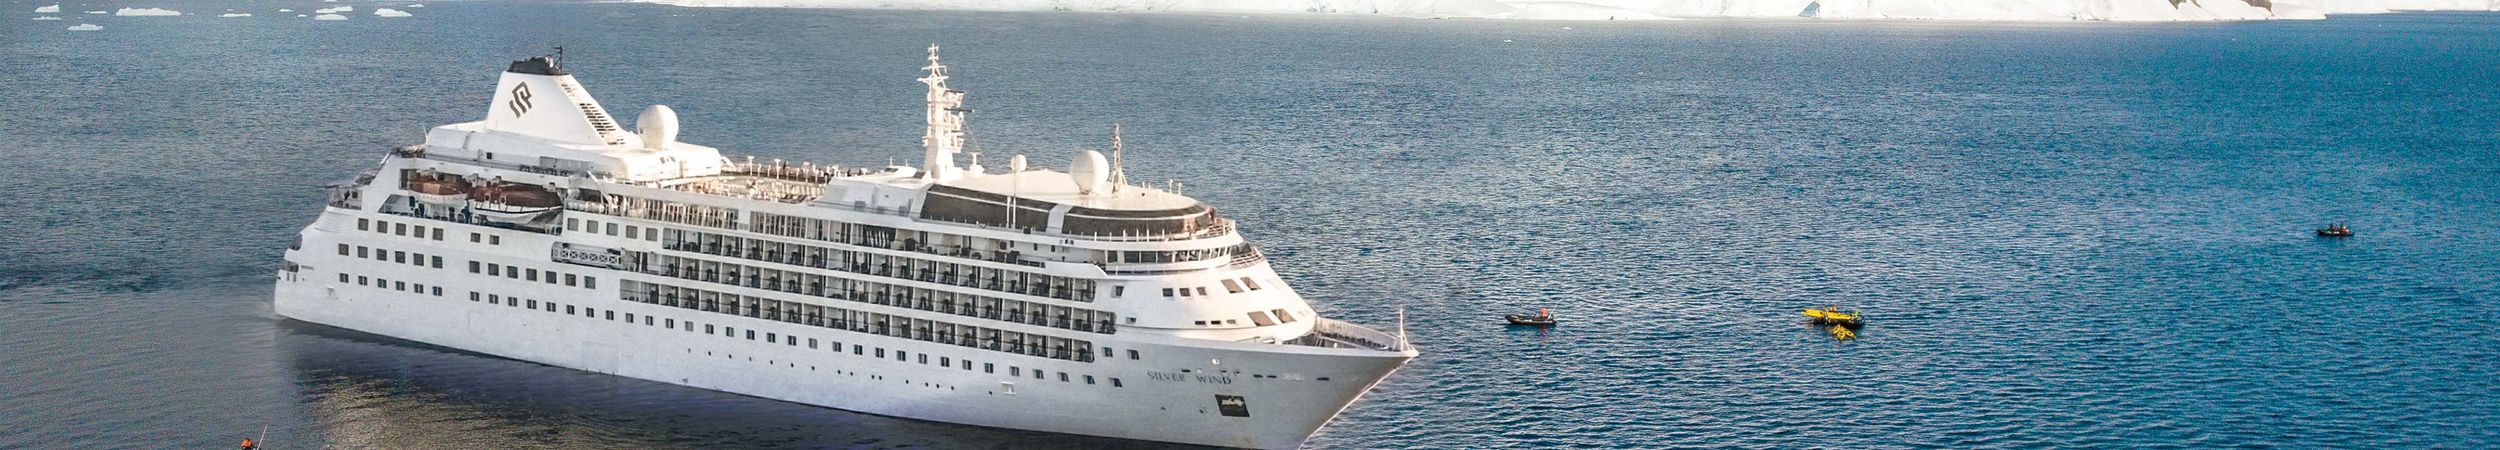 Best and Luxurious Cruise Ship – Silver Wind | Silversea